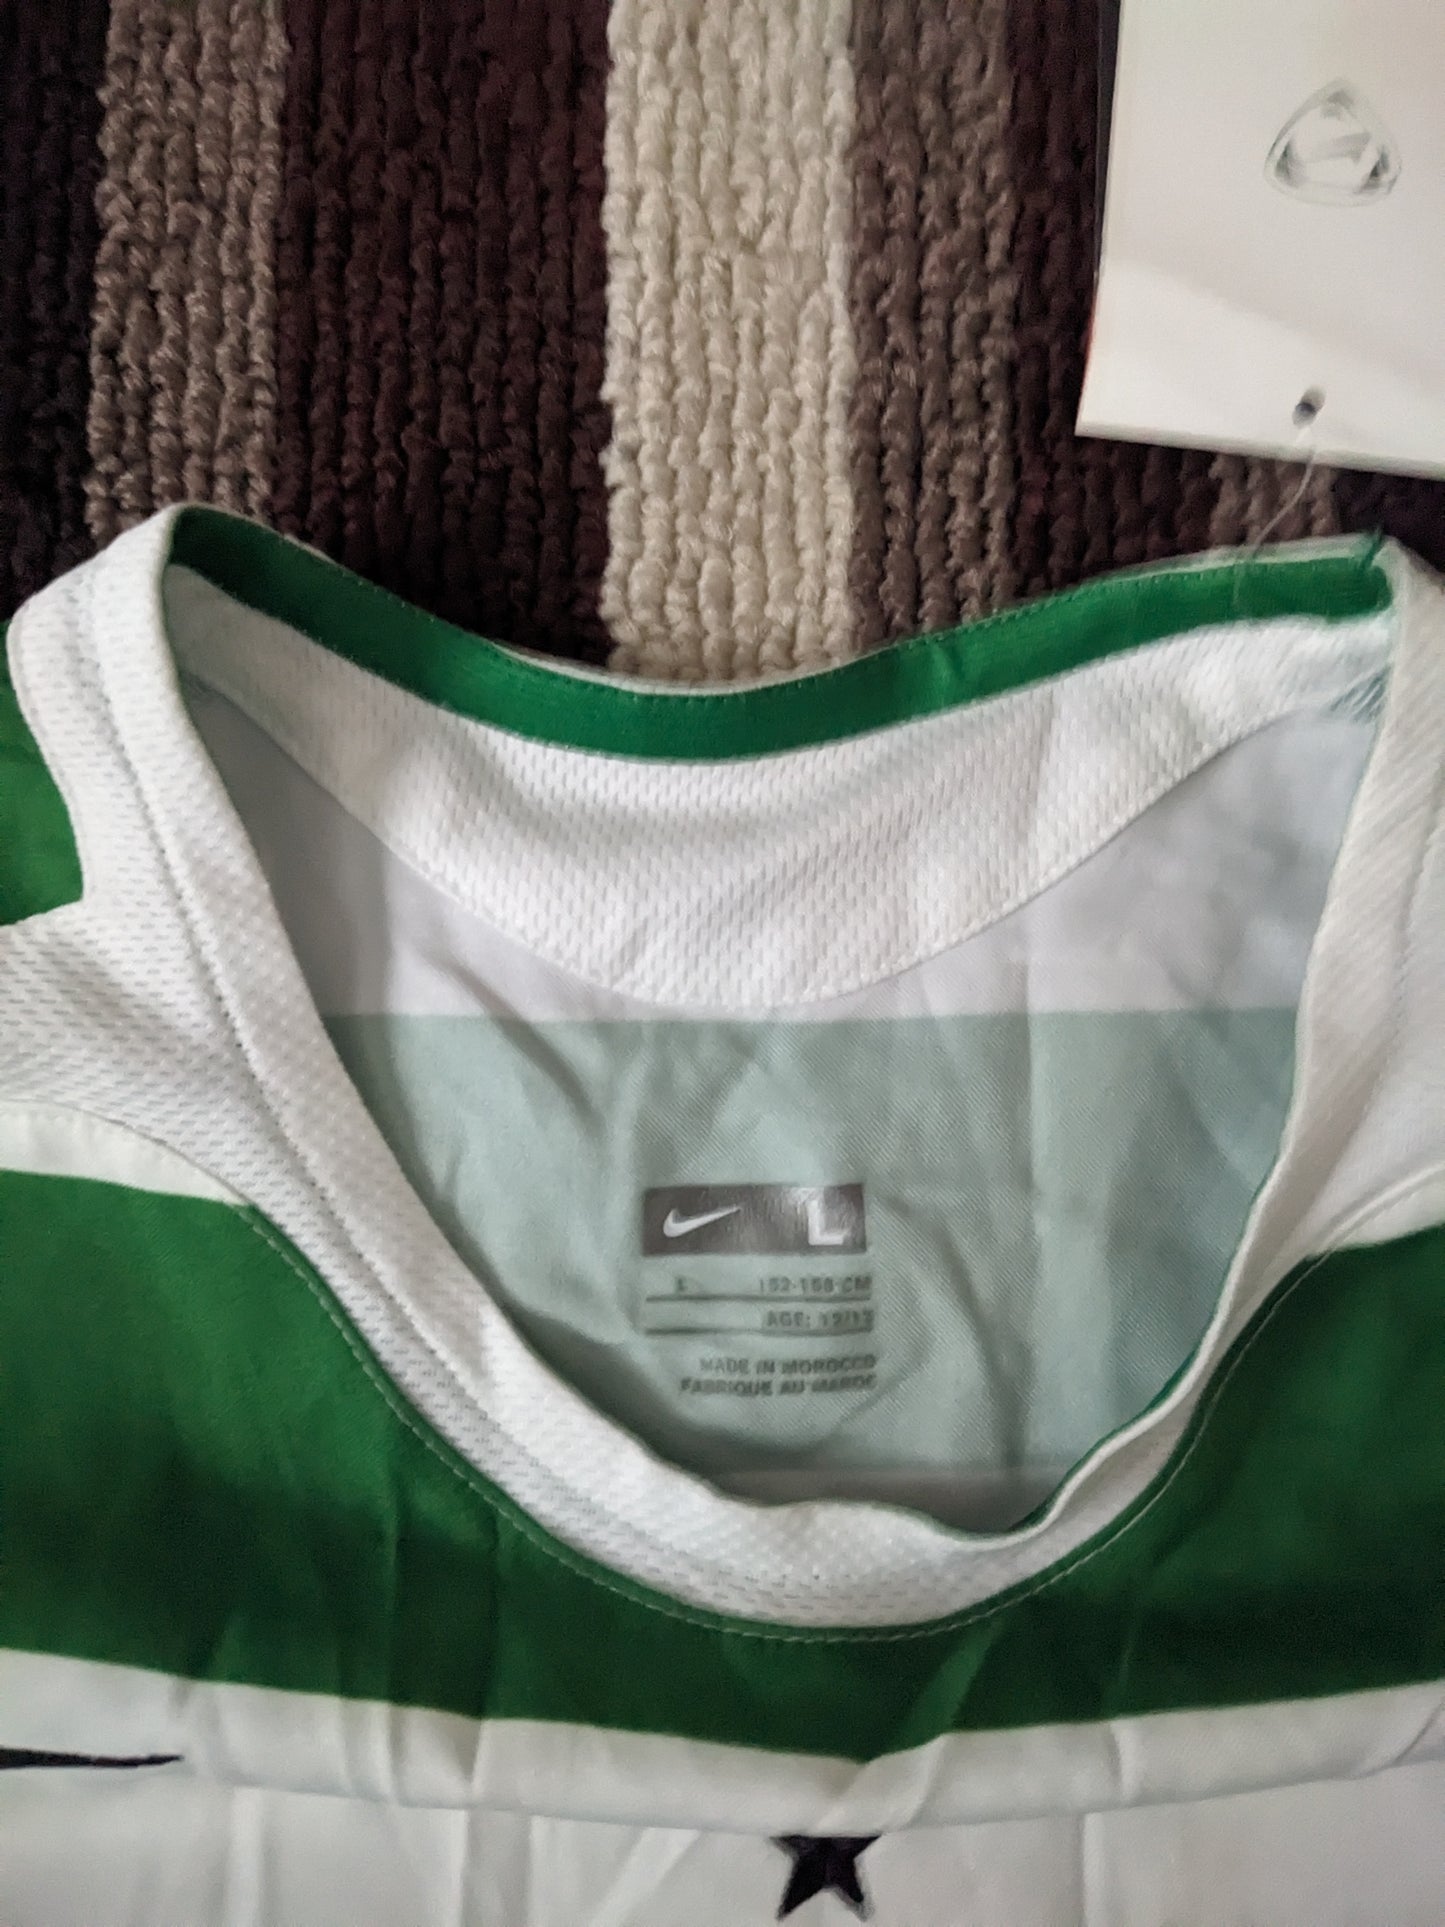 Celtic Scotland home (YOUTH L) *Brand new with tags